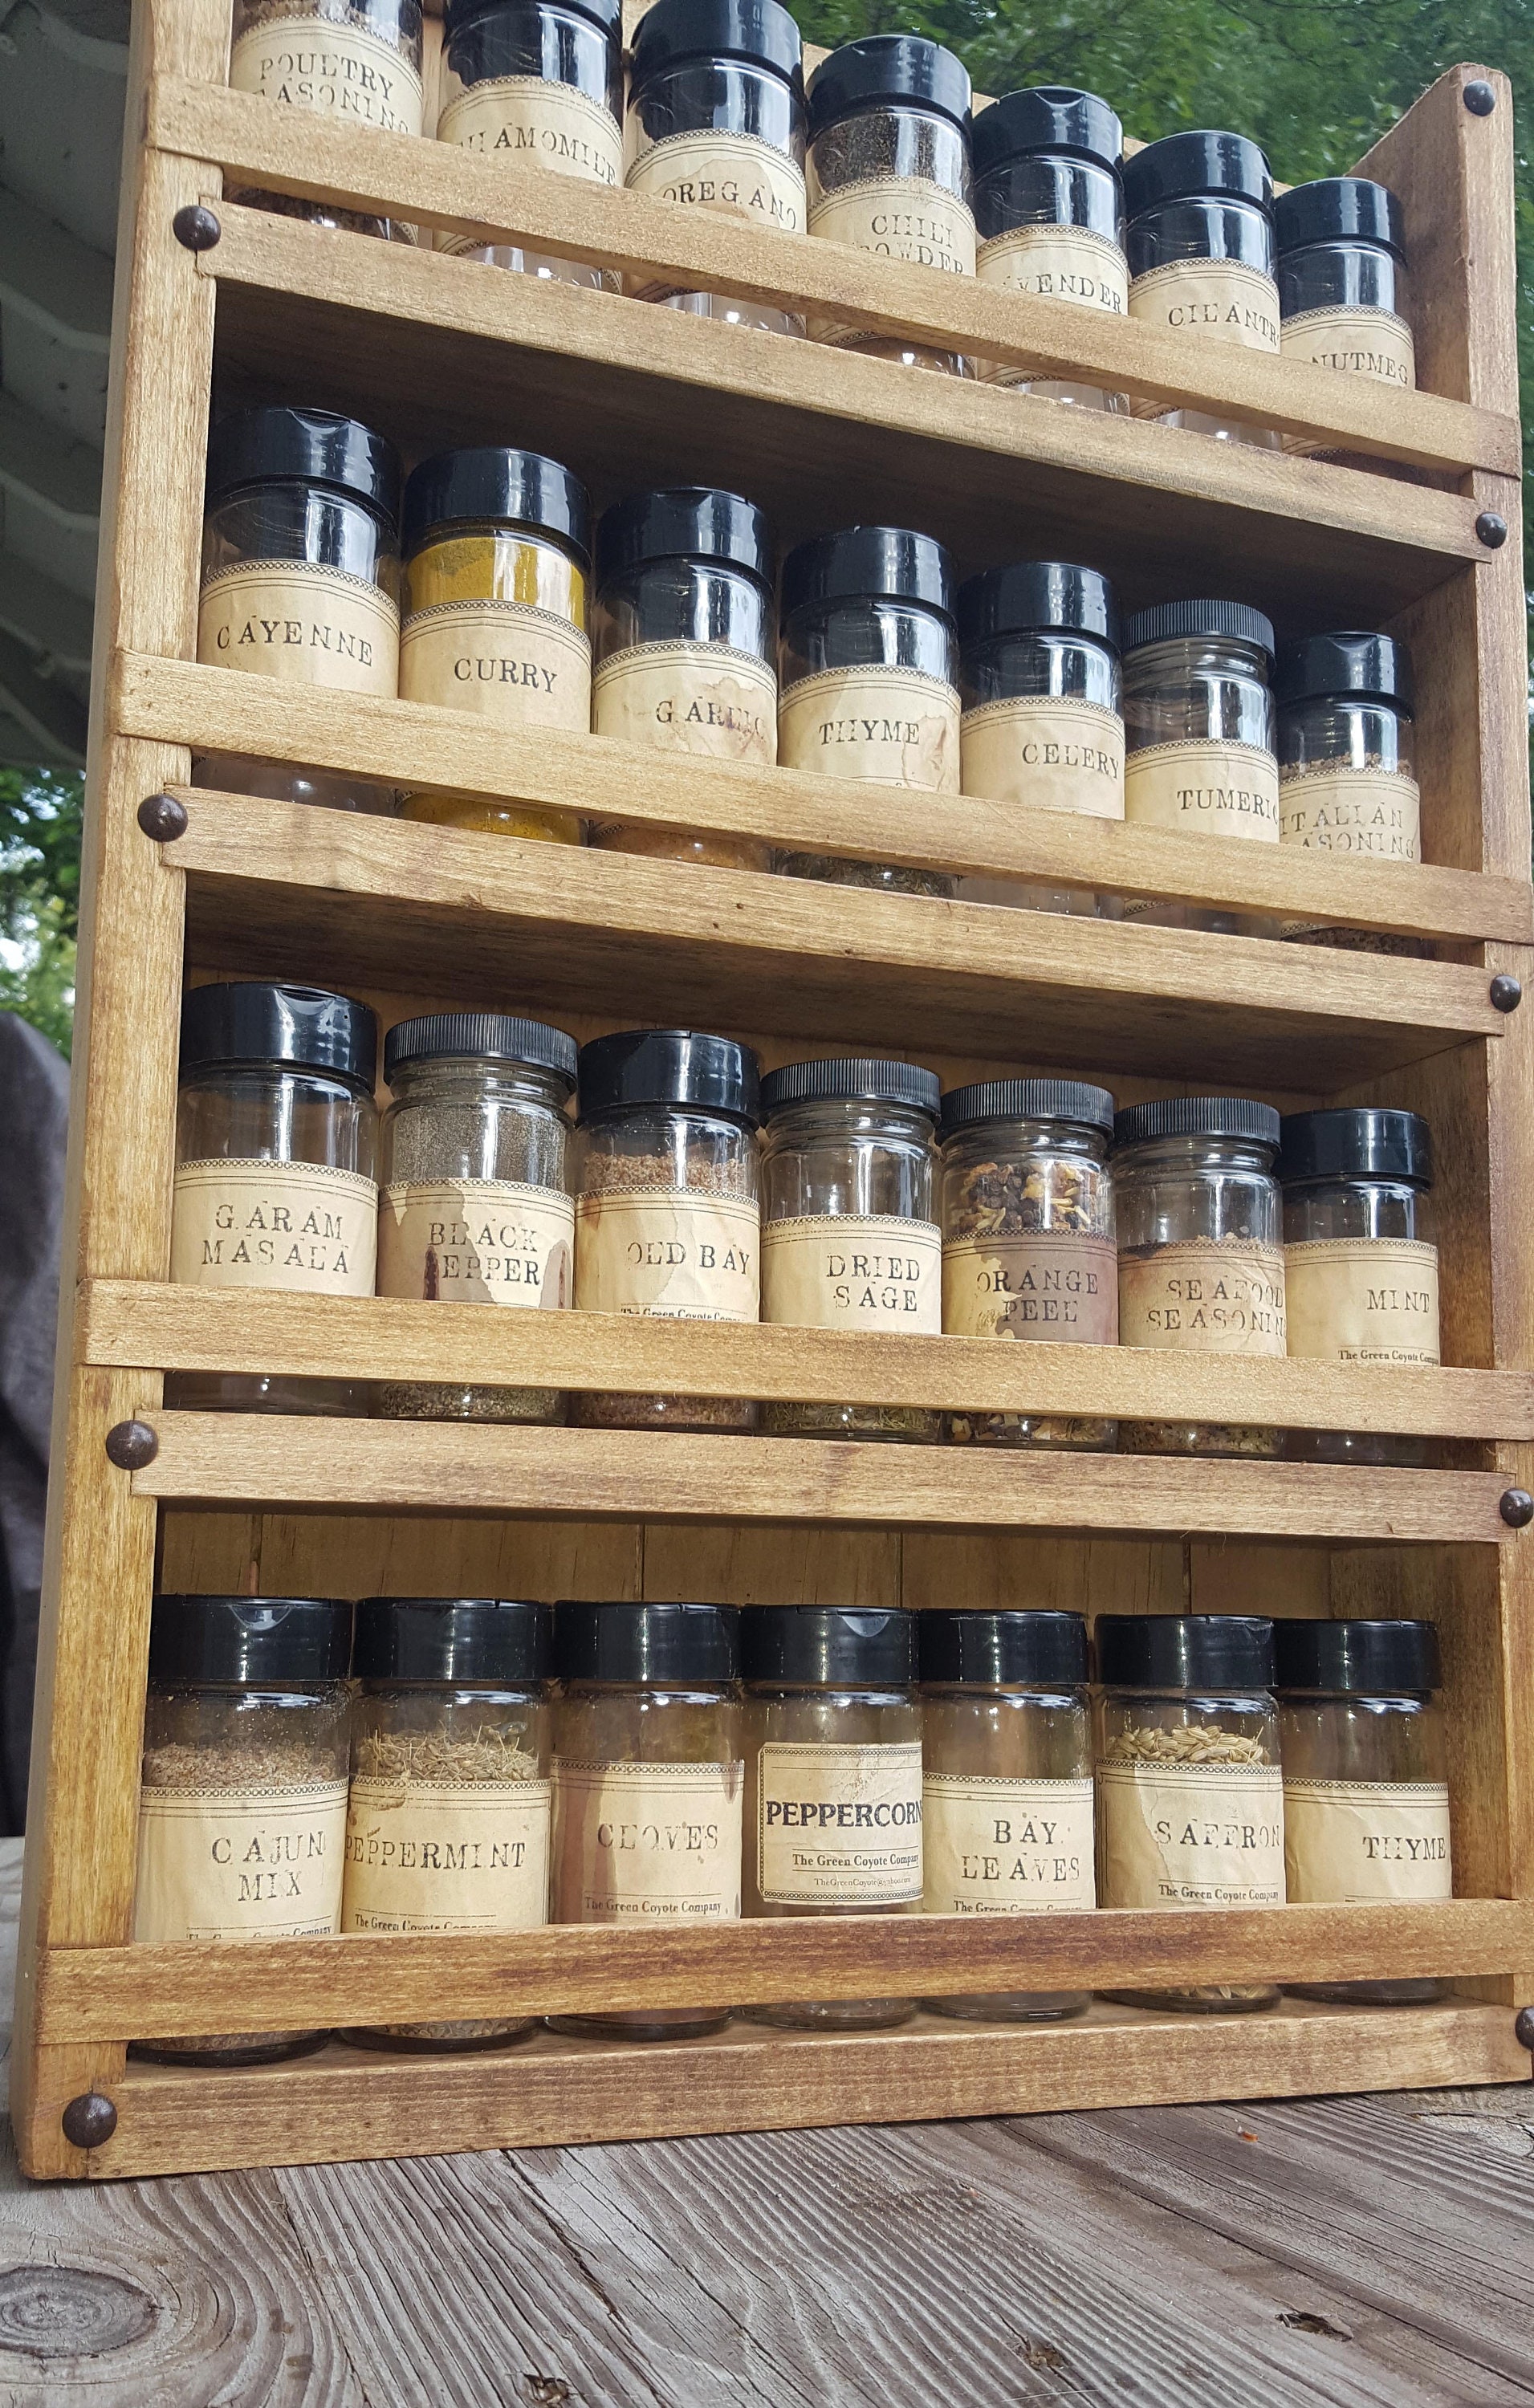 Rustic Home Decor Spice Rack Holds 40-50 Spice Jars 